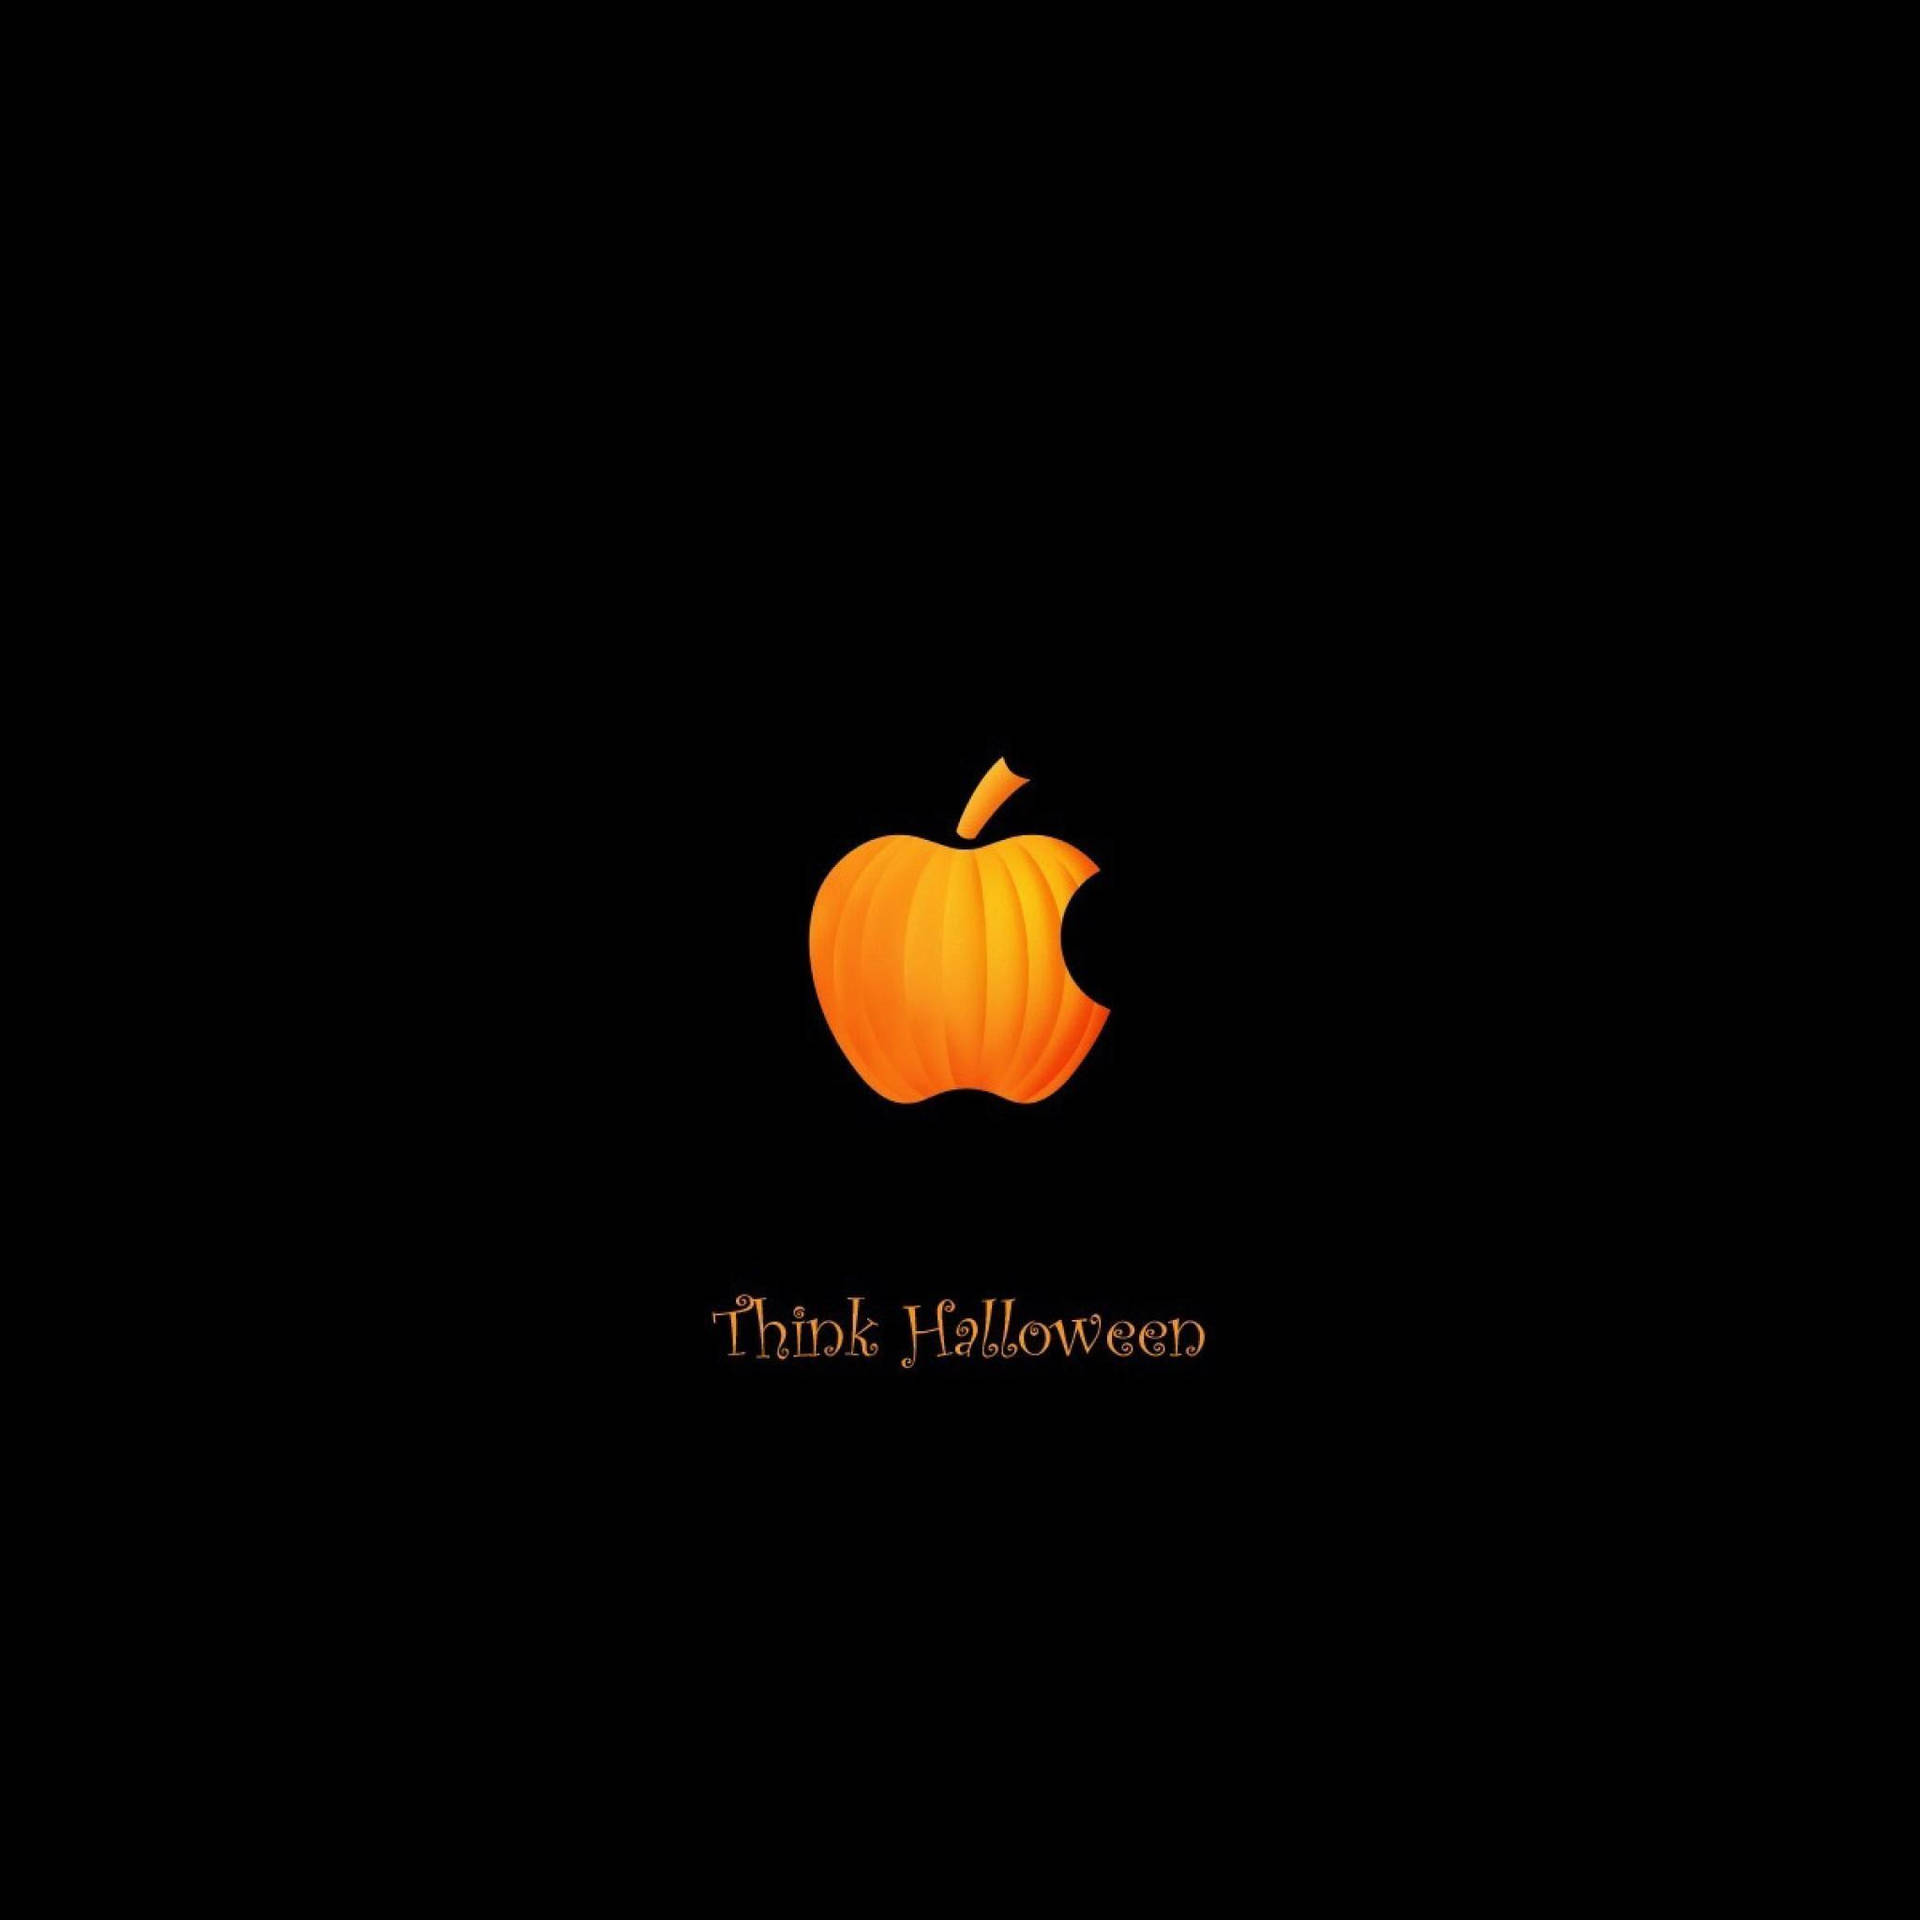 Trick or Treat? Celebrate Halloween with this spooky Ipad Wallpaper